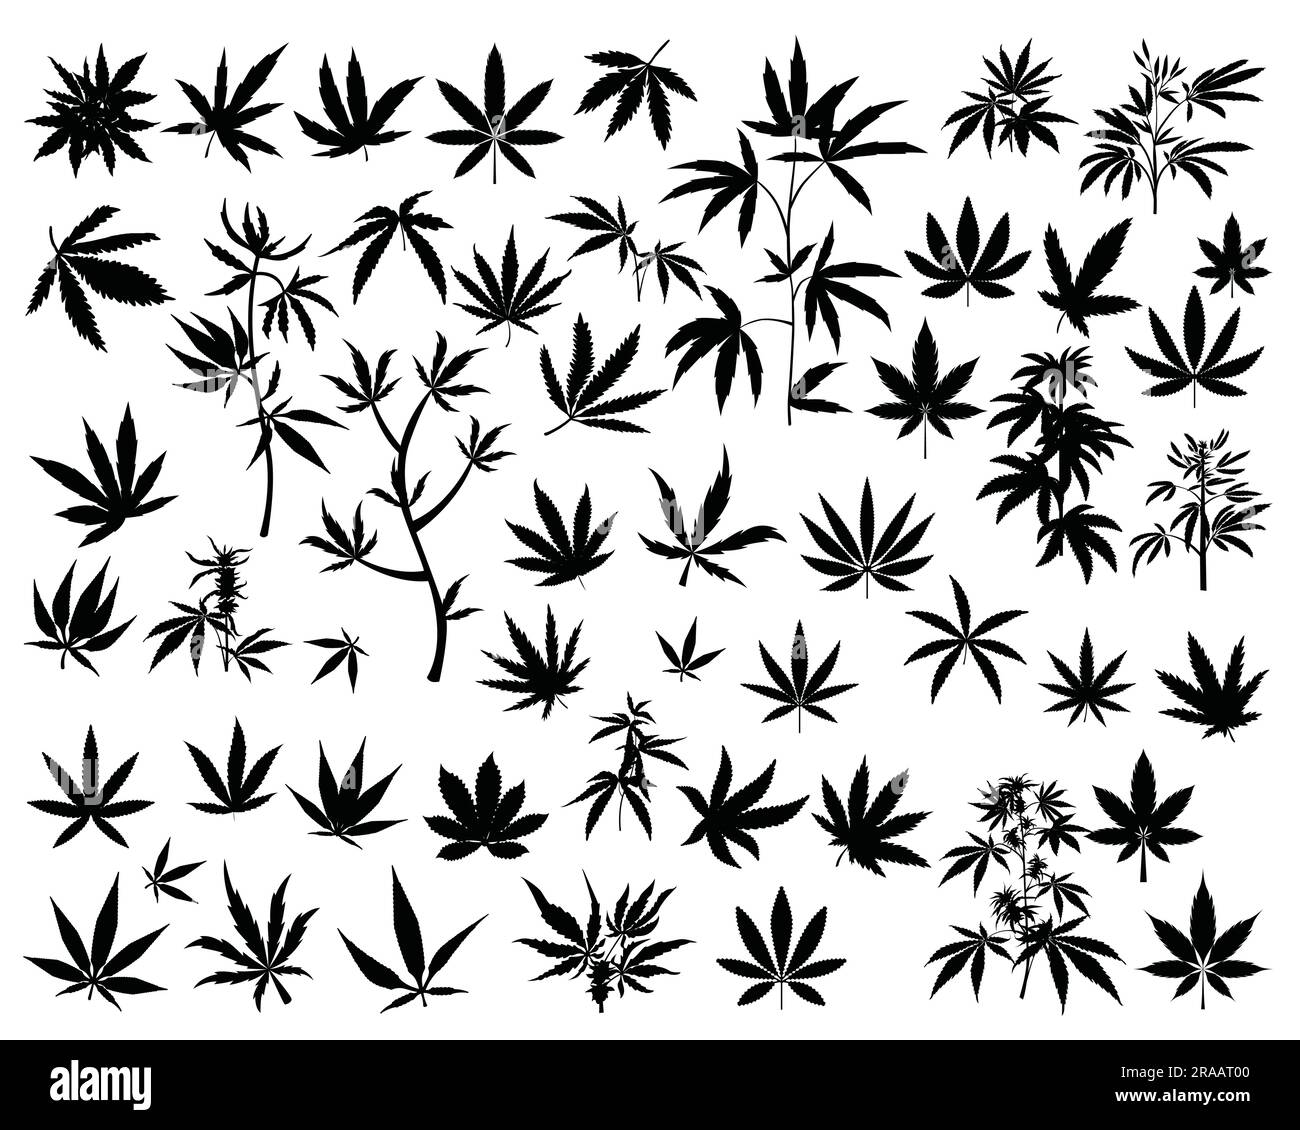 Set of Cannabis Leaves Silhouette Stock Vector